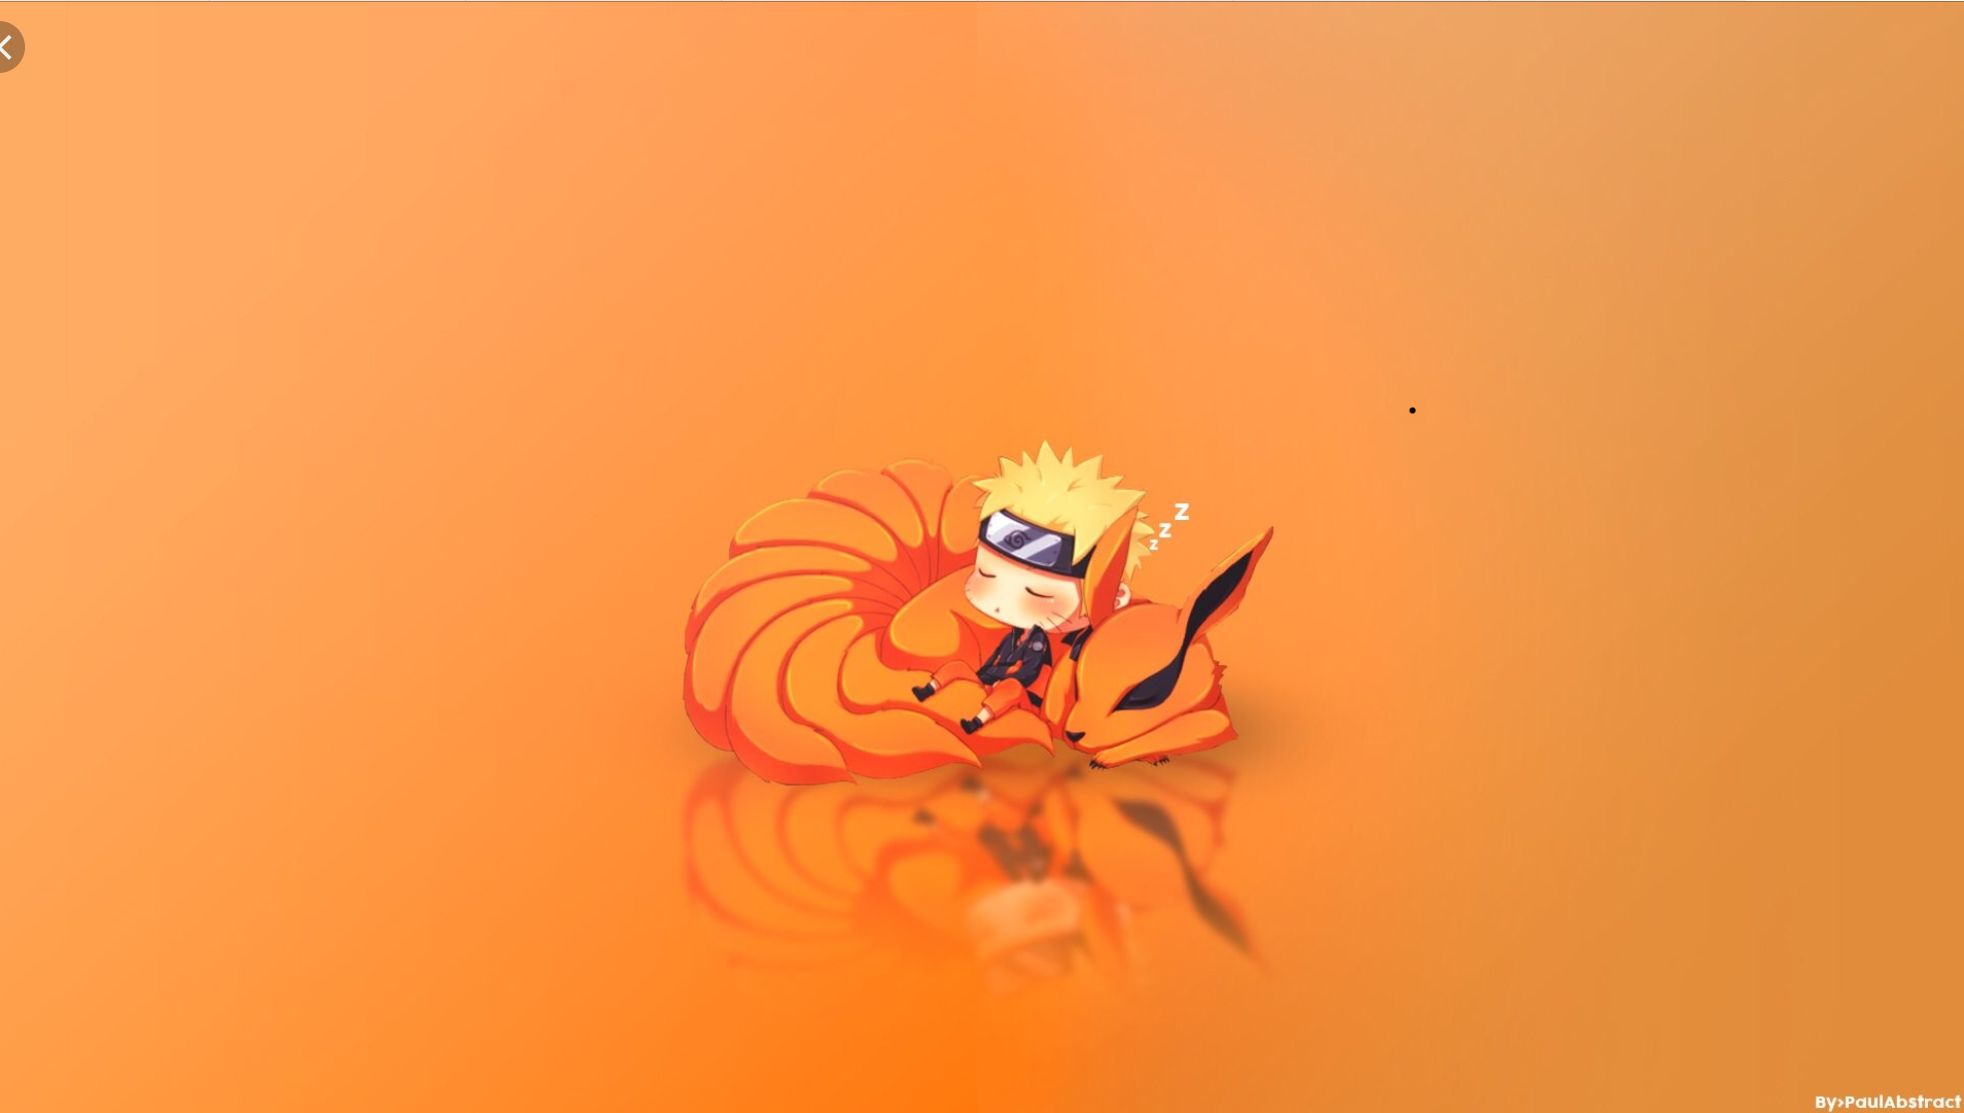 A cartoon character on an orange background - Naruto